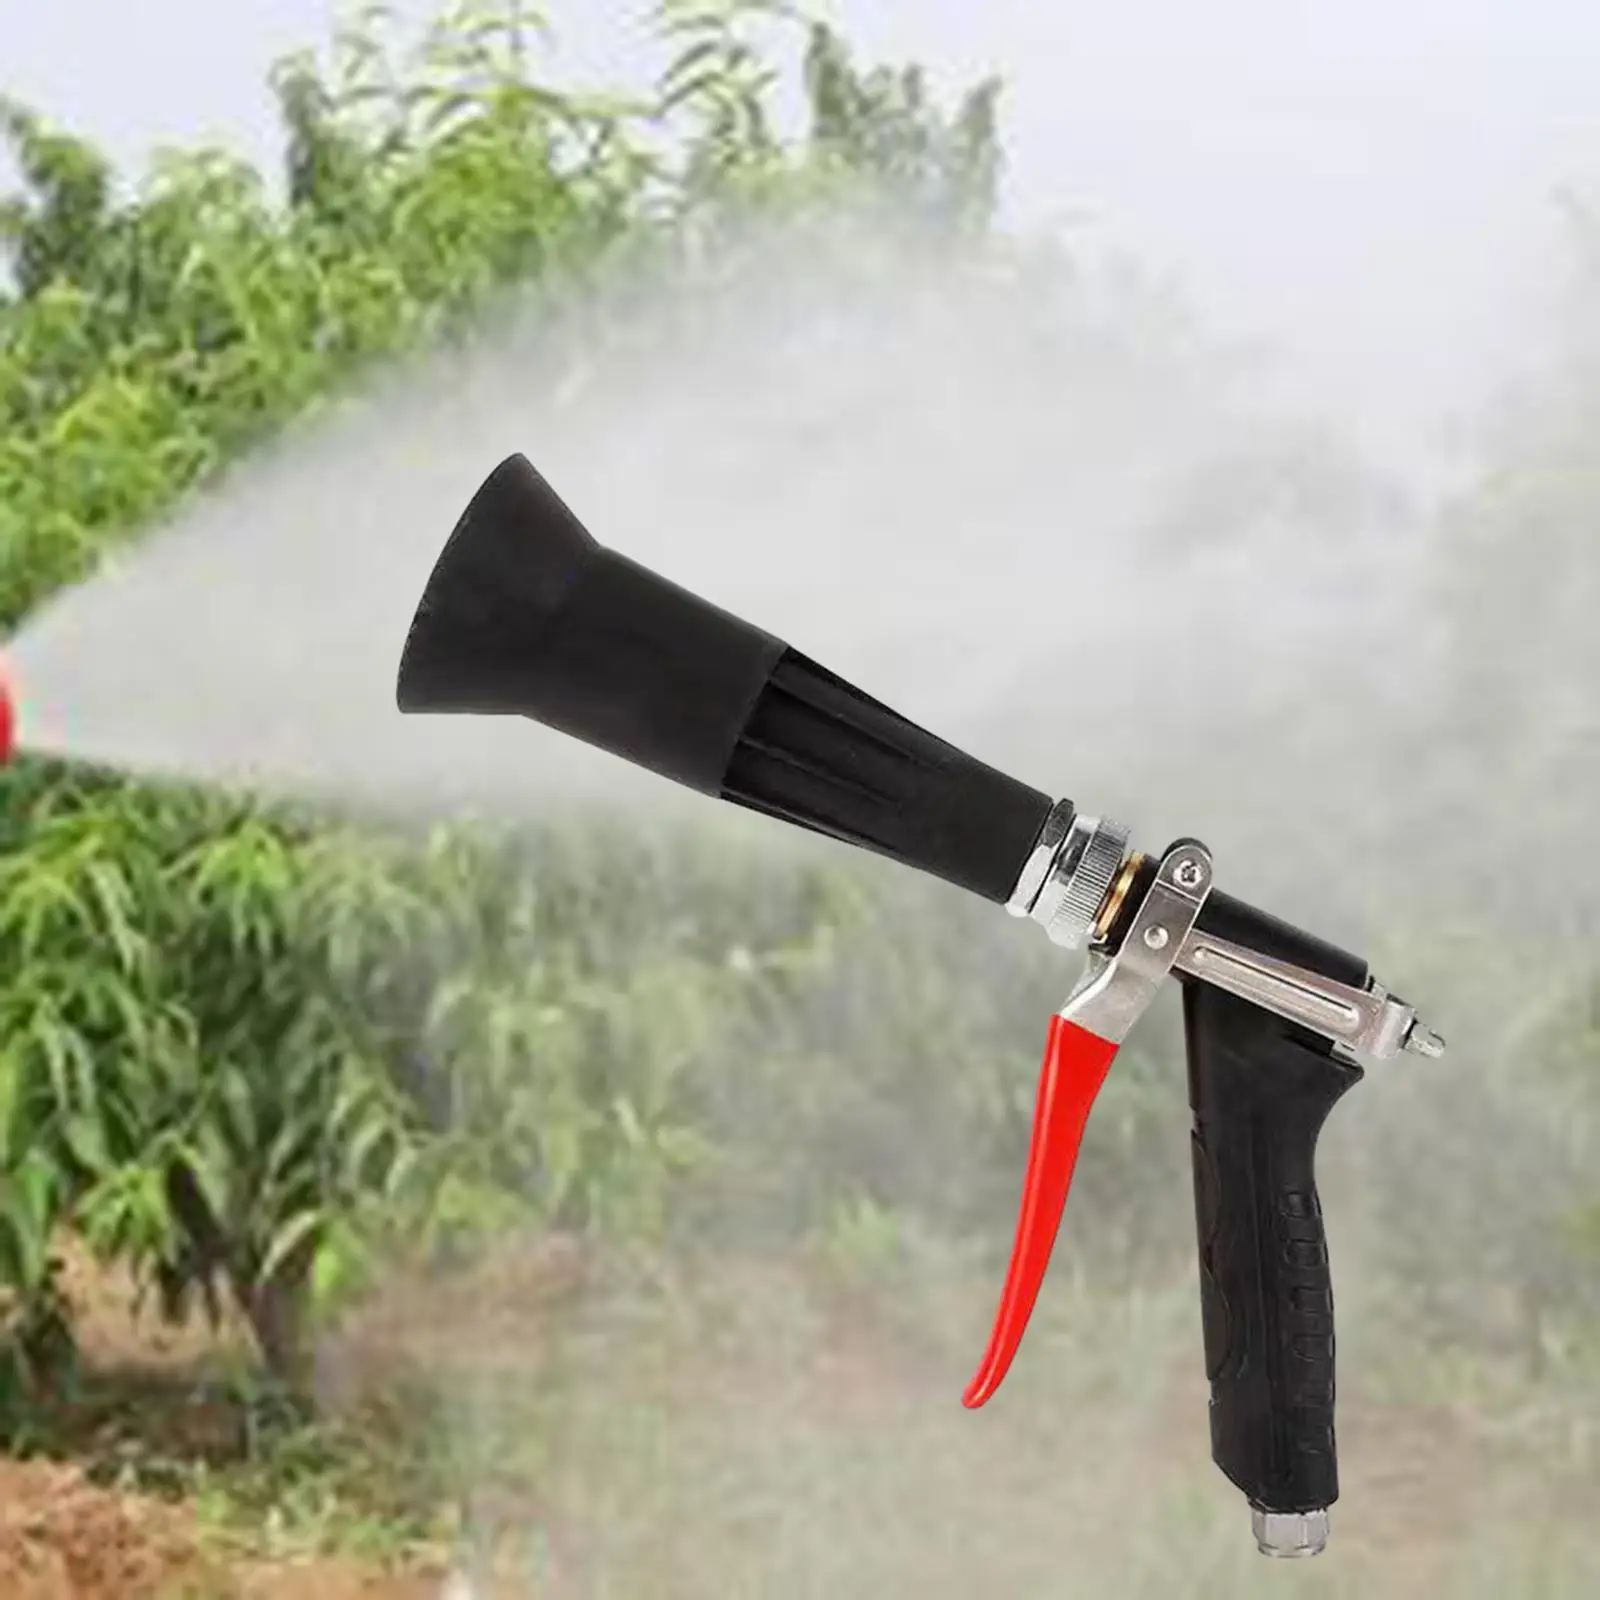 Agricultural High Pressure Water Hose Nozzle Comfortable Grip Replacements for Watering Flowers Plants Sturdy Easily Install